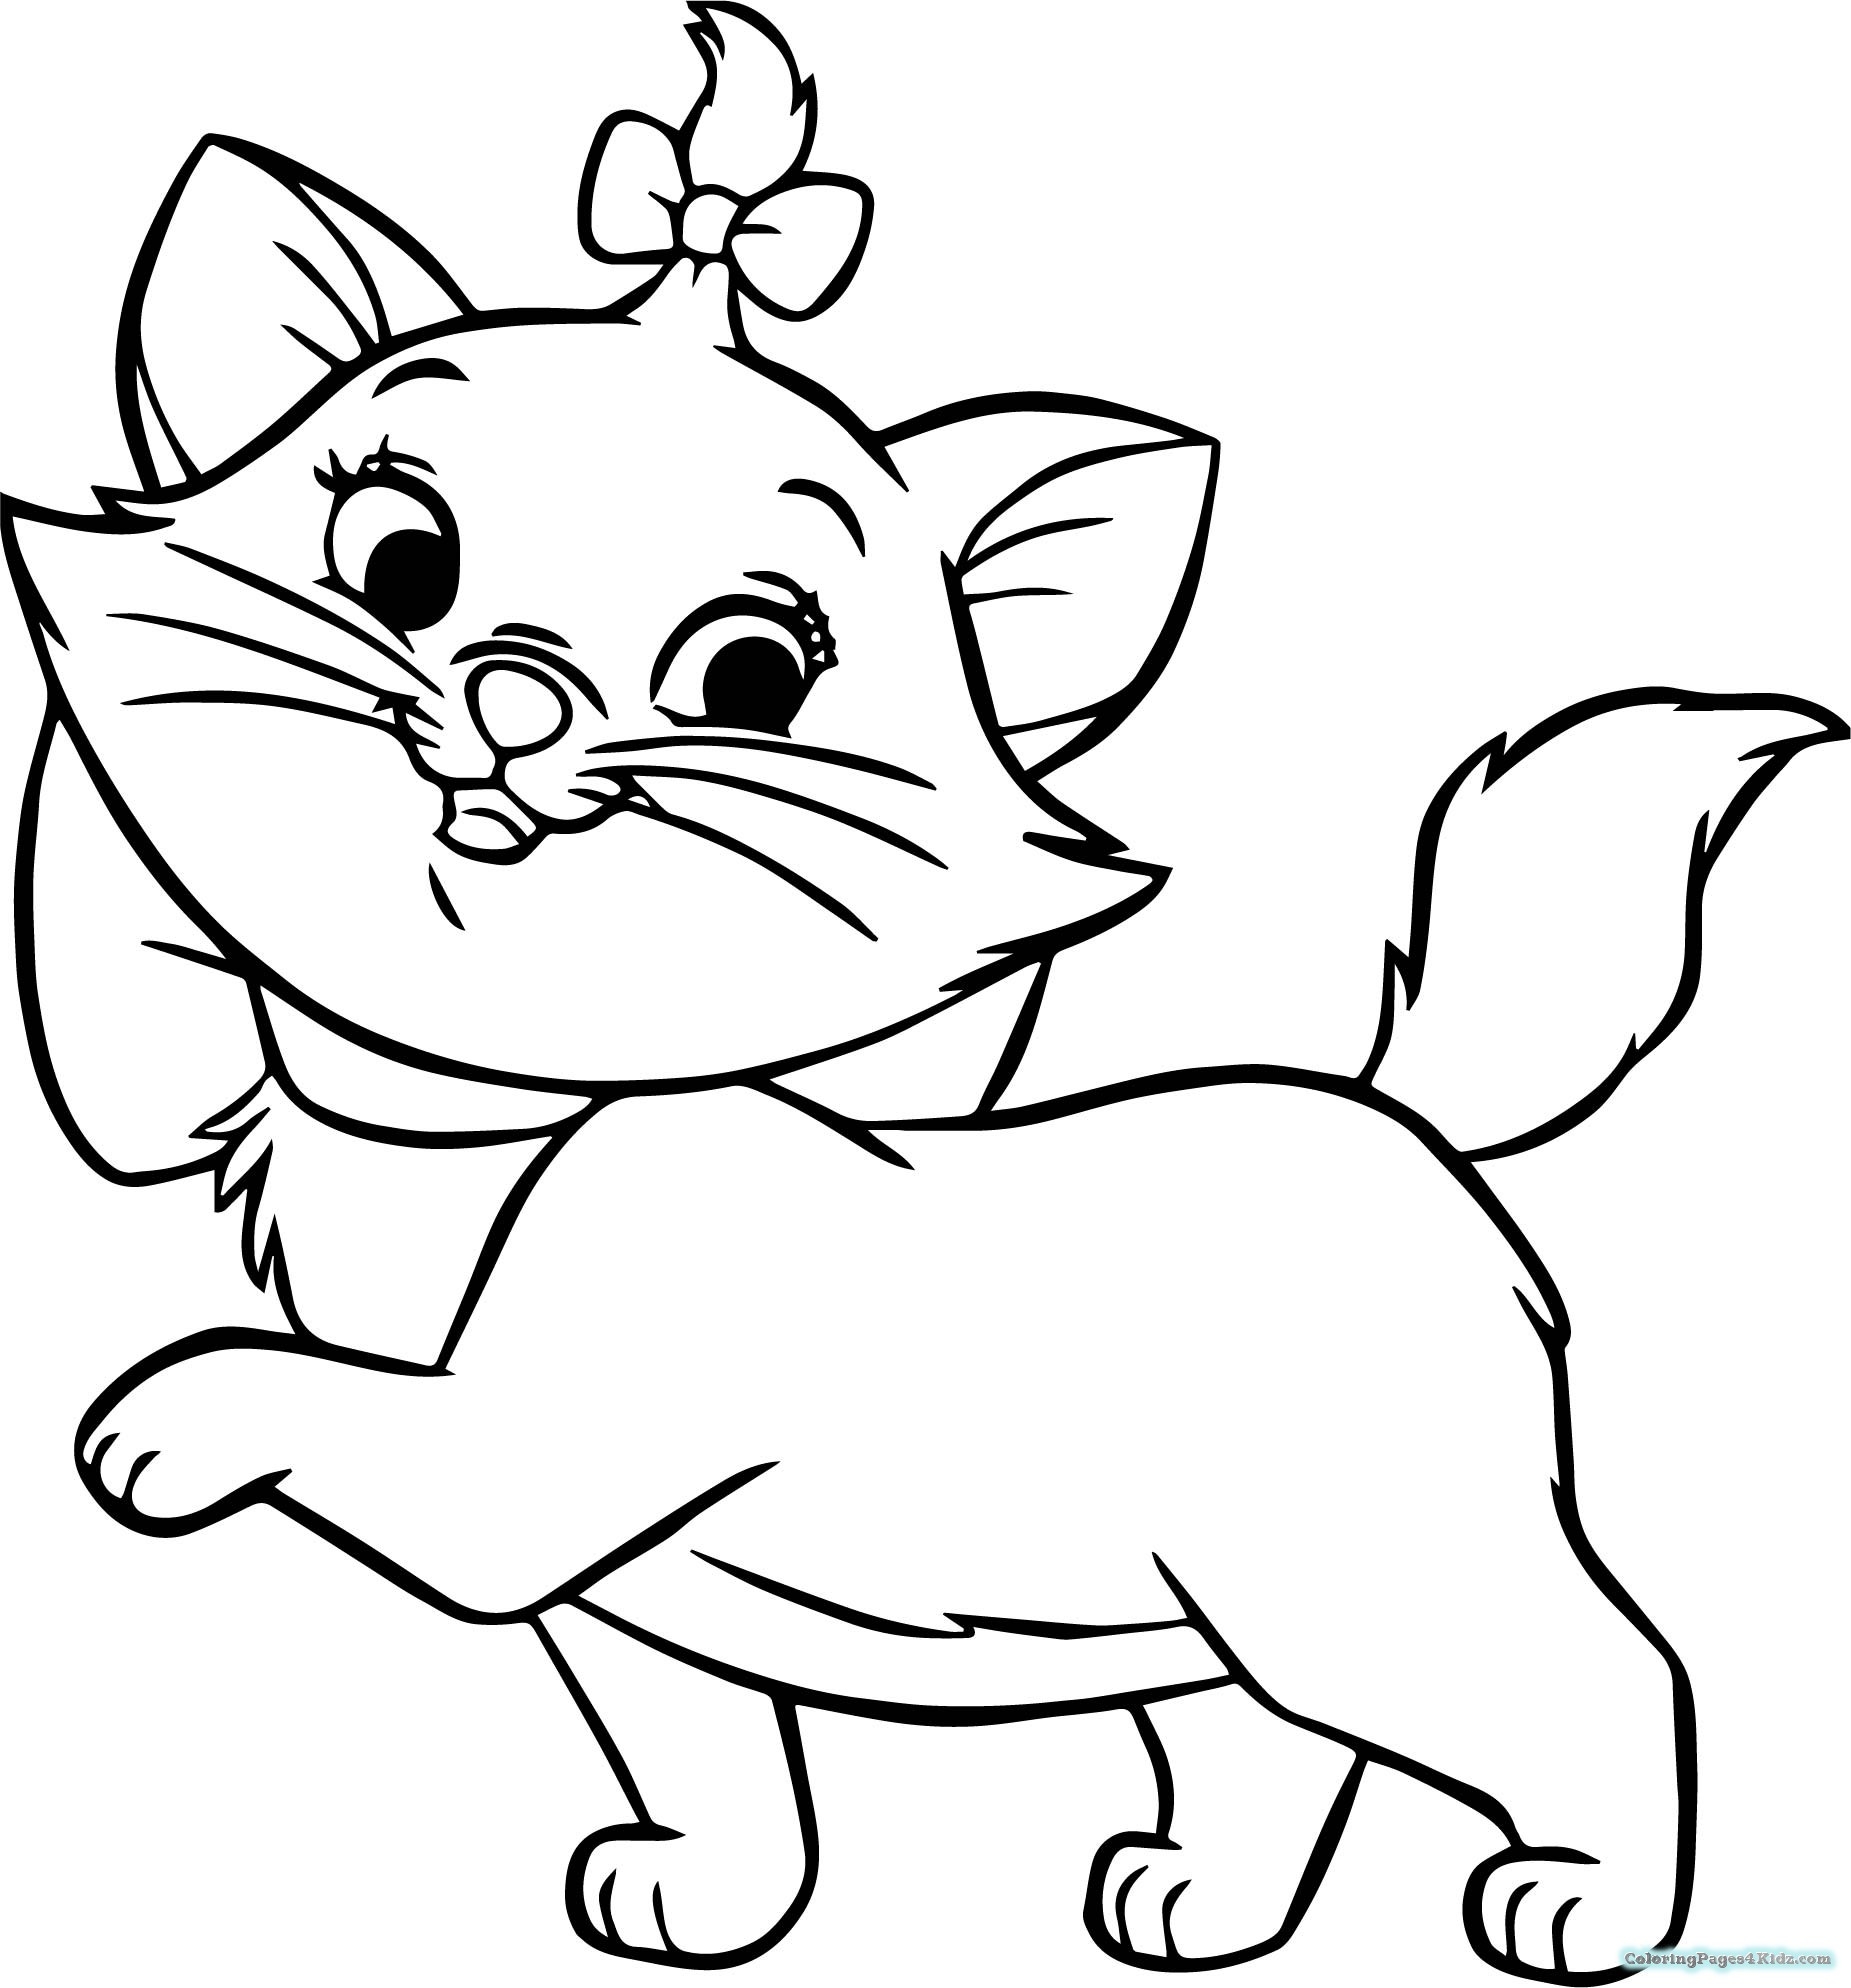 Cute Kitten Coloring Pages at GetDrawings | Free download